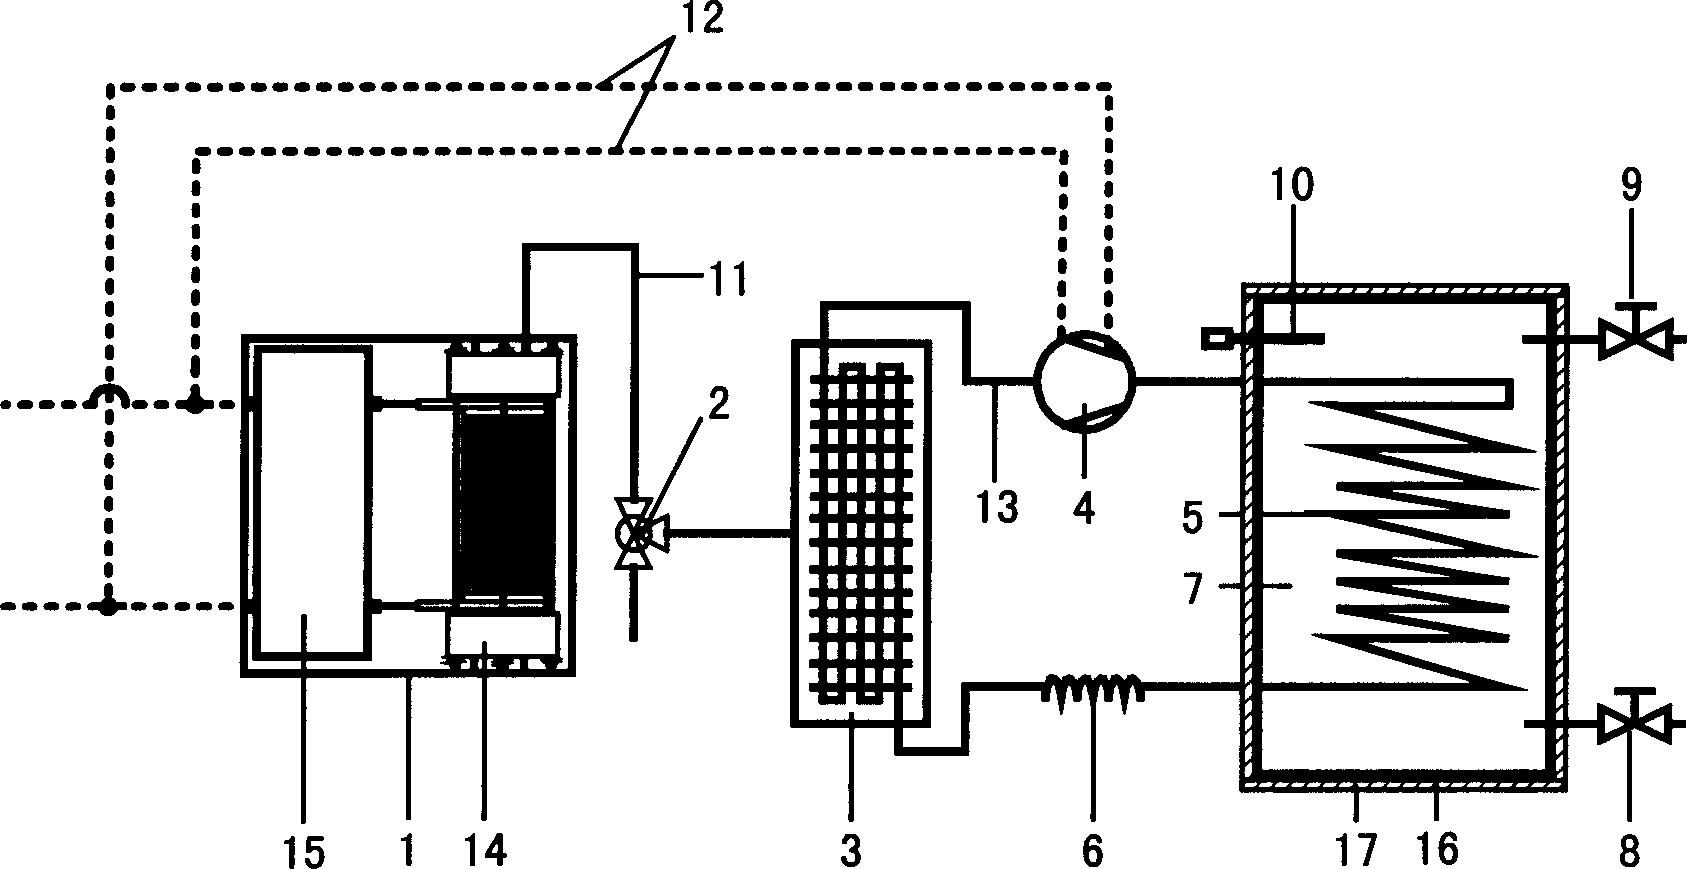 Combined system of fuel battery and air source heat pump water heater